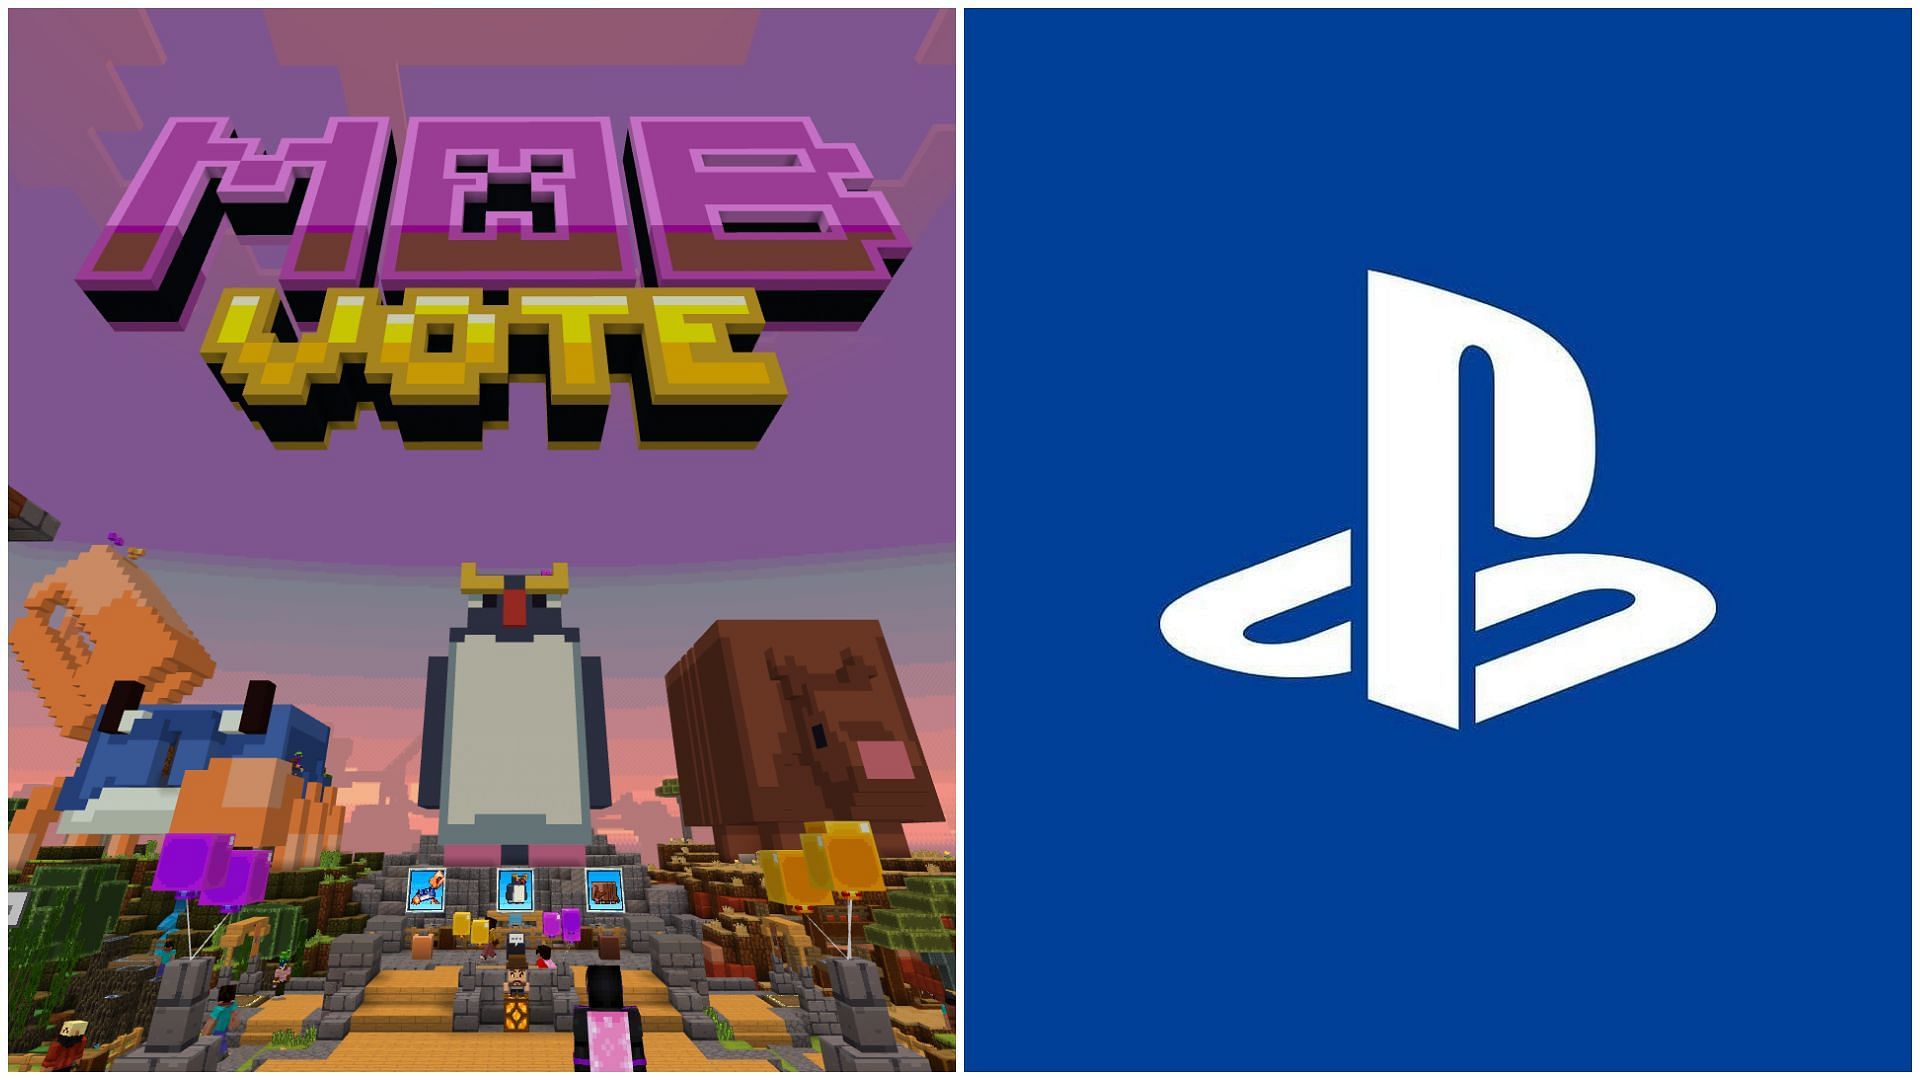 Minecraft players can vote for their favorite mobs easily through PlayStation (Image via Sportskeeda)